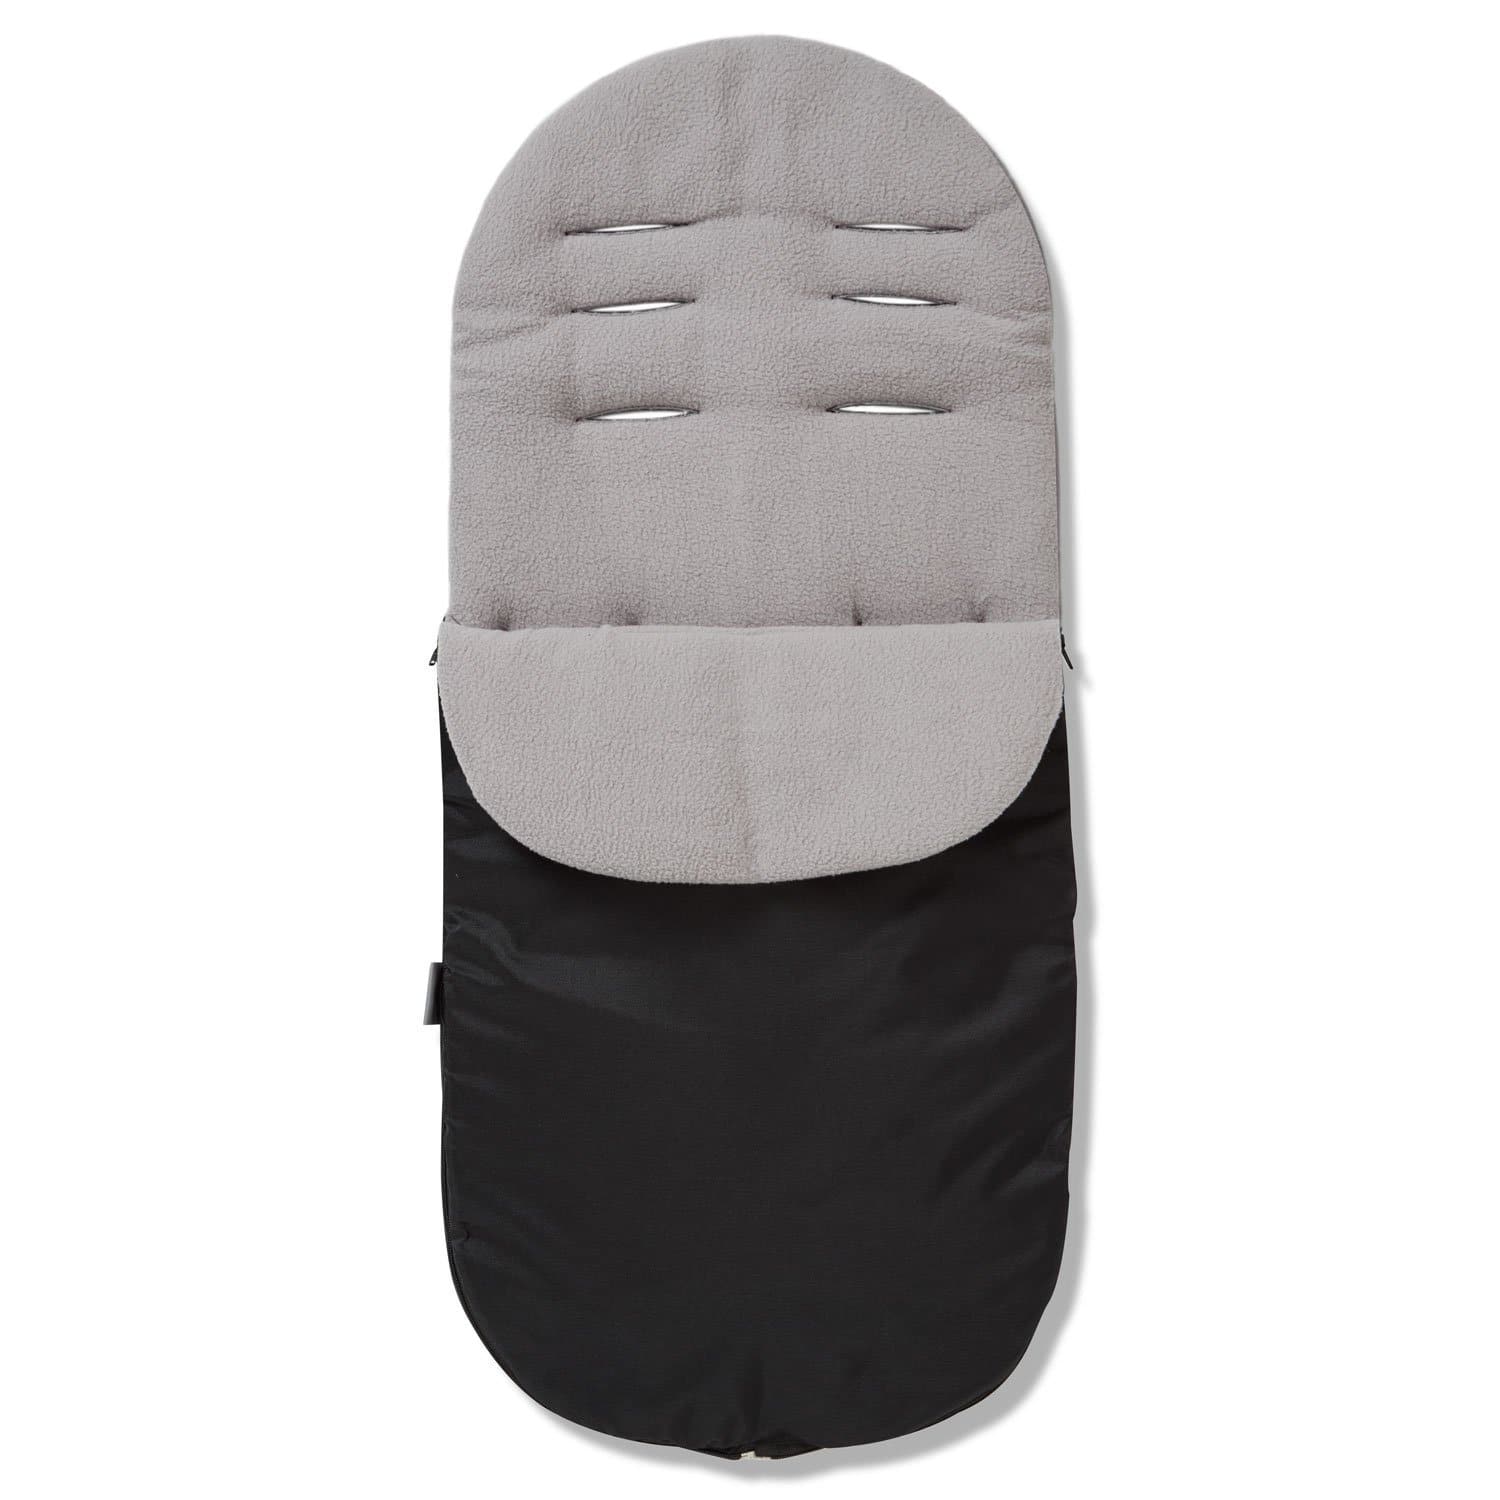 Footmuff / Cosy Toes Compatible with My Babiie - Grey / Fits All Models | For Your Little One